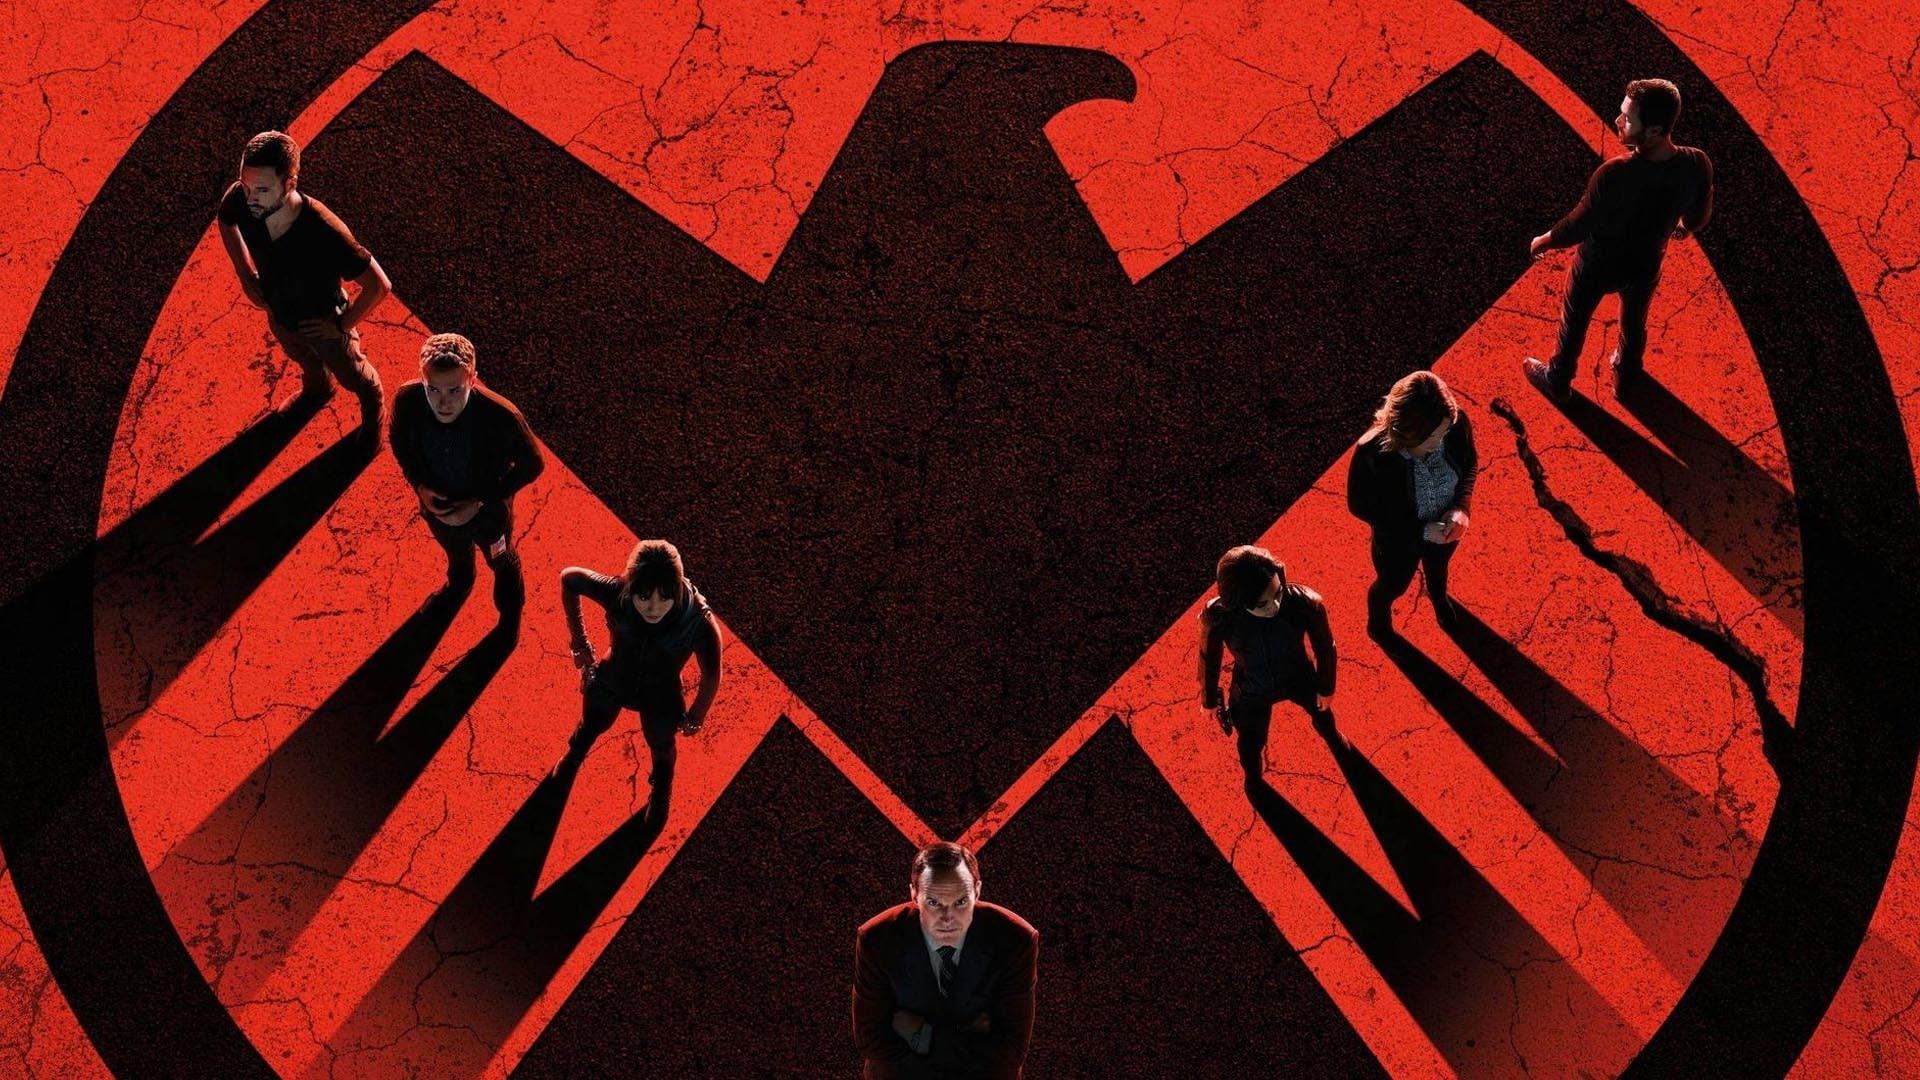 marvels agents of shield, shadow, group of people, high angle view